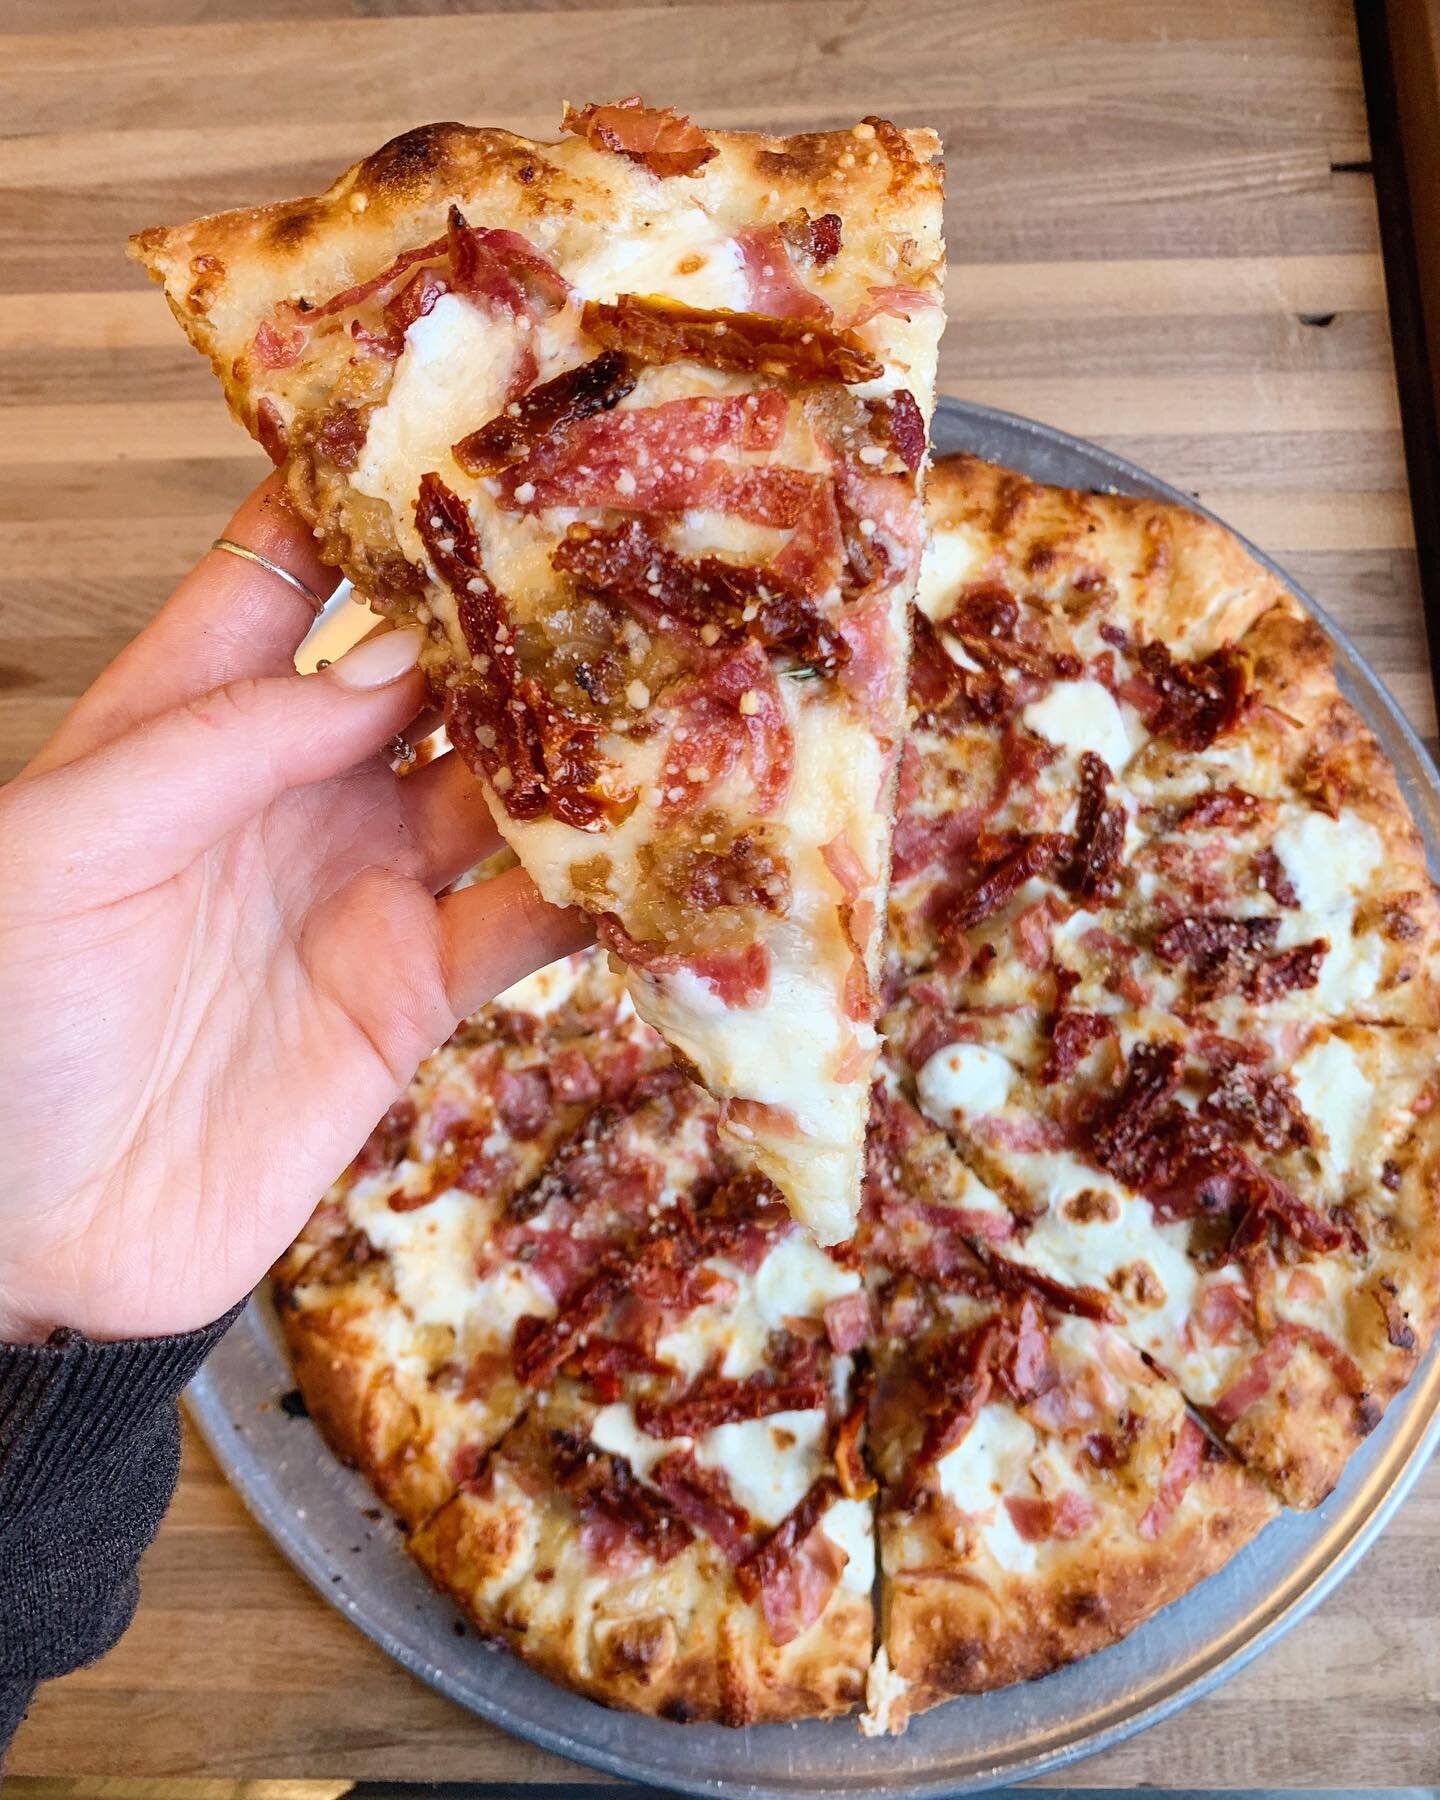 It&rsquo;s #NationalPizzaDay&hellip; our FAVORITE day DUH😍🍕❤️

On special tonight (and possibly tomorrow.. until we run out) is a specialty 𝟯 𝗟𝗶𝘁𝘁𝗹𝗲 𝗣𝗶𝗴𝘀 𝗣𝗶𝘇𝘇𝗮 🐷🍅

Pig #1 - Bacon Jam
Pig #2 - Prosciutto 
Pig #3 - Soppressata
 - to